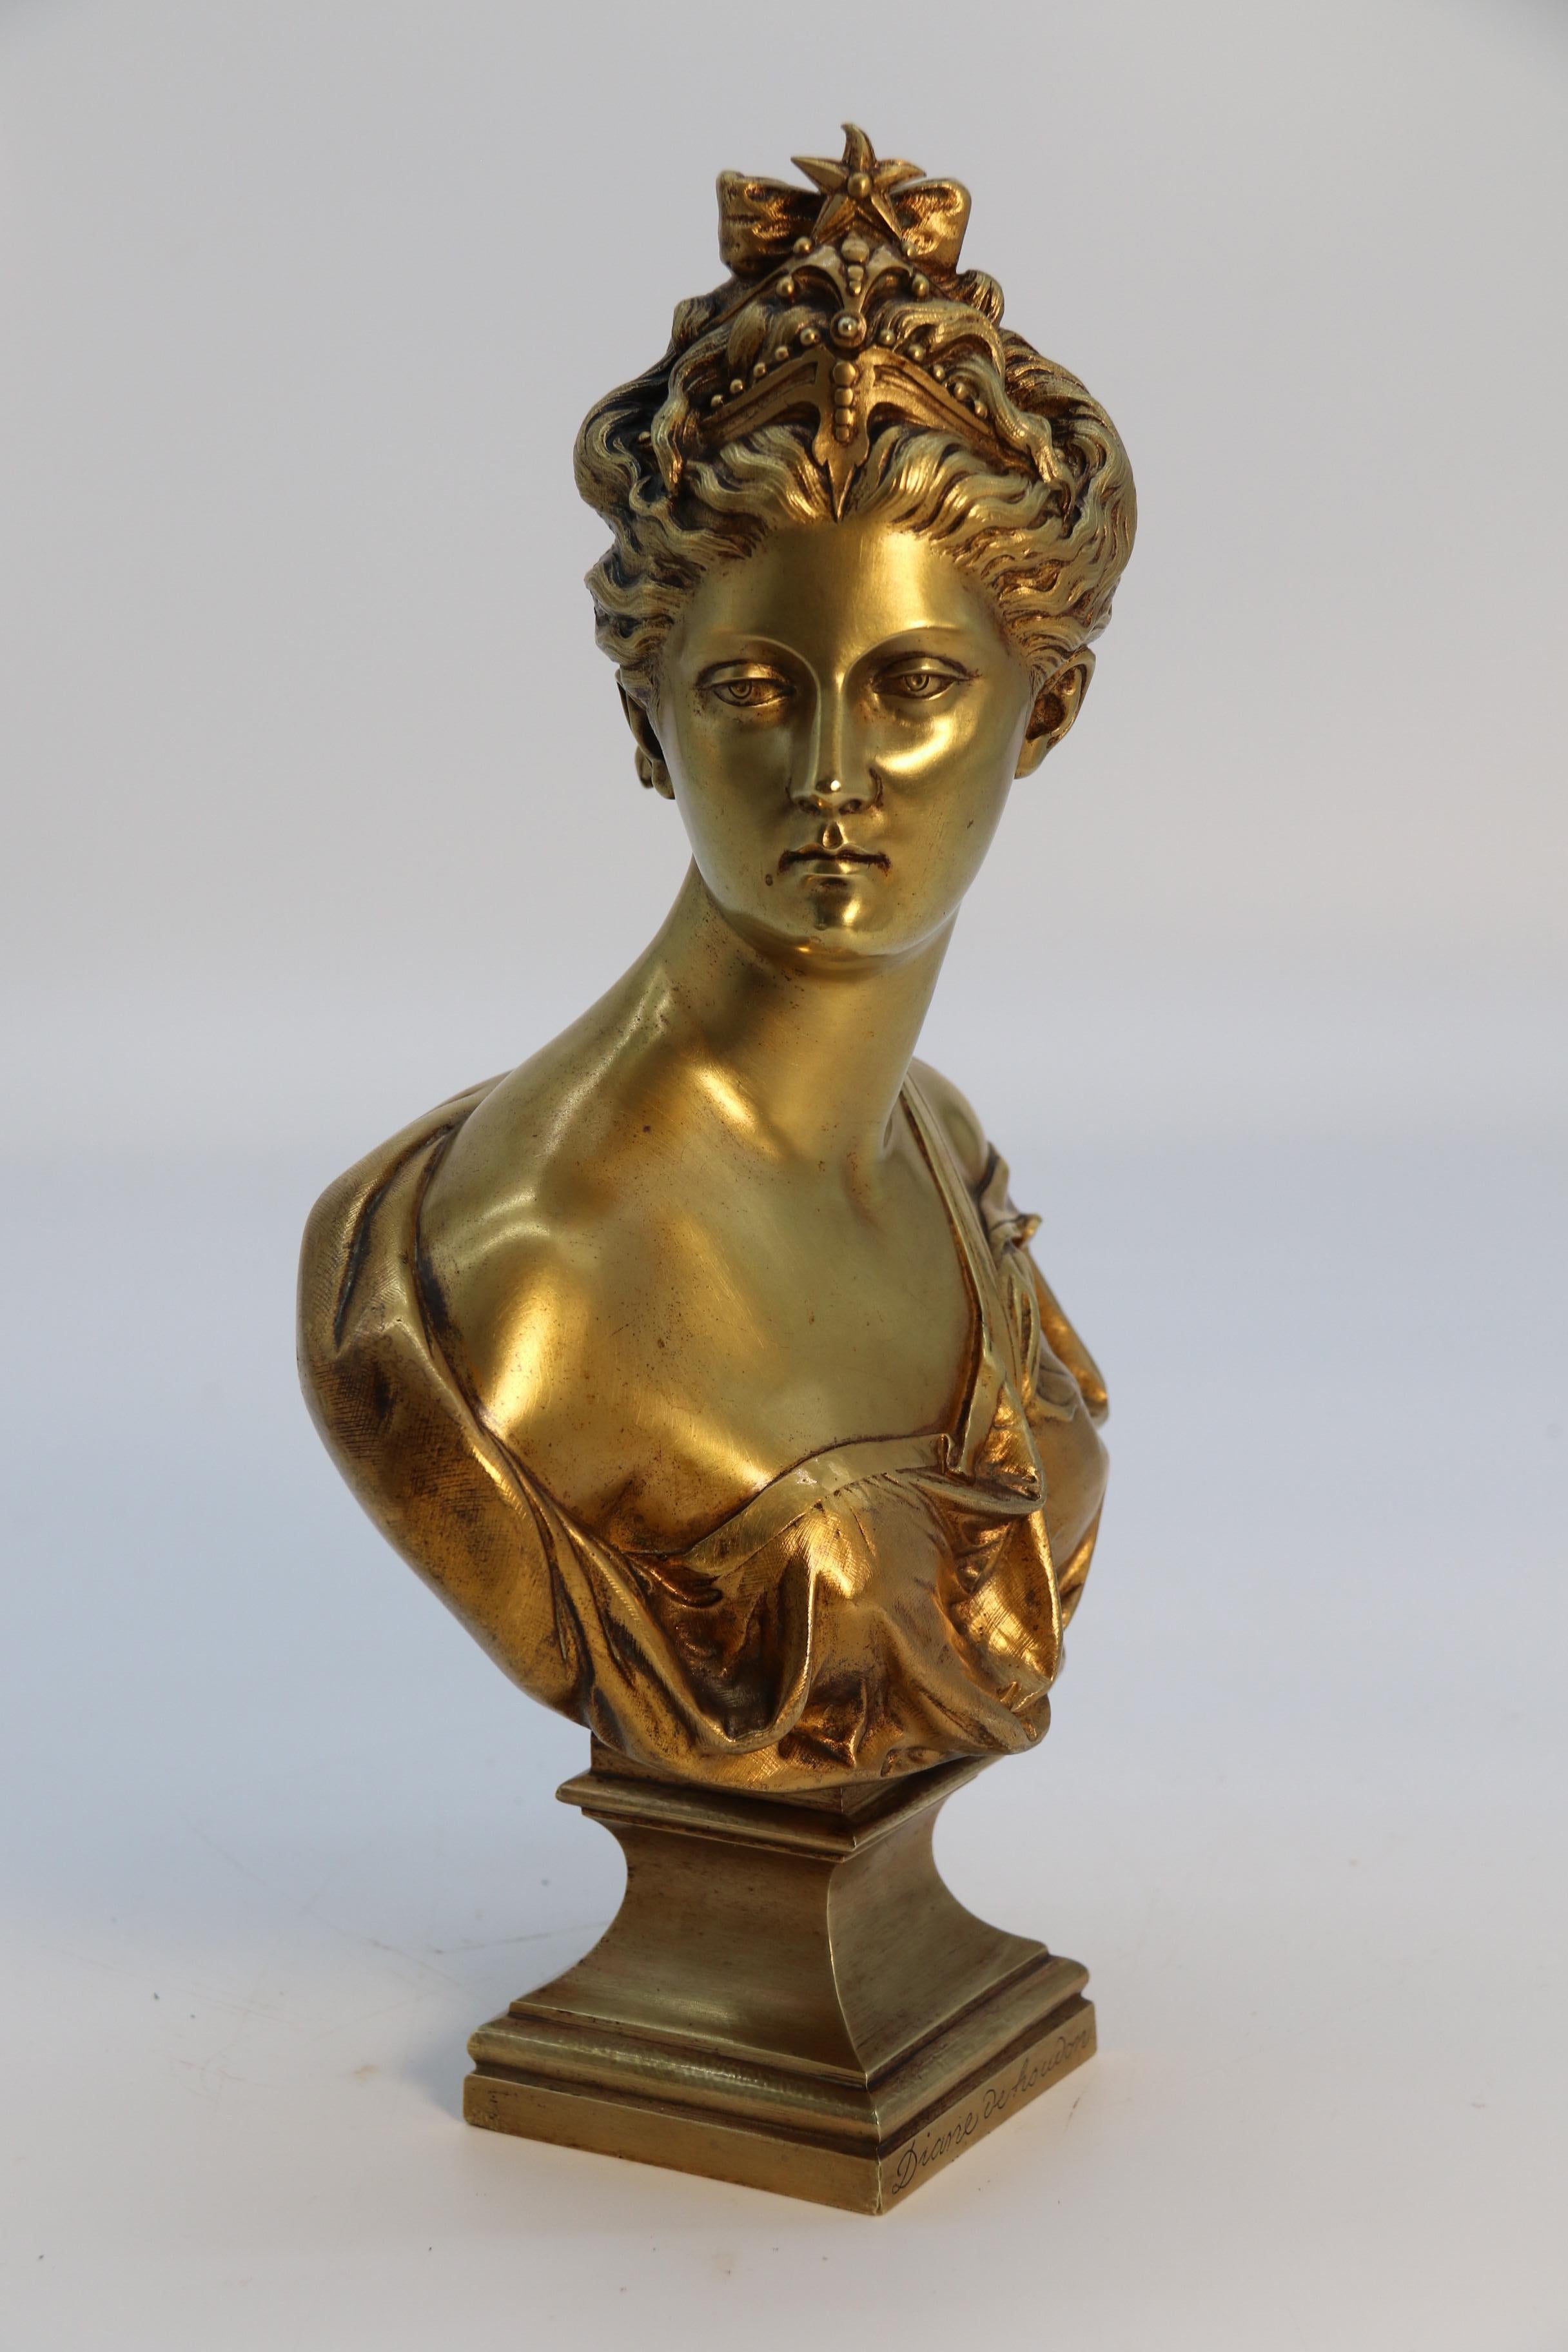 This very pleasing mellow gilt bronze portrait bust depicts Dianna the Huntress. She was a goddess in Roman and Hellenistic religions and was considered a patroness of the countryside, hunters, crossroads and the moon. She equated to the Greek